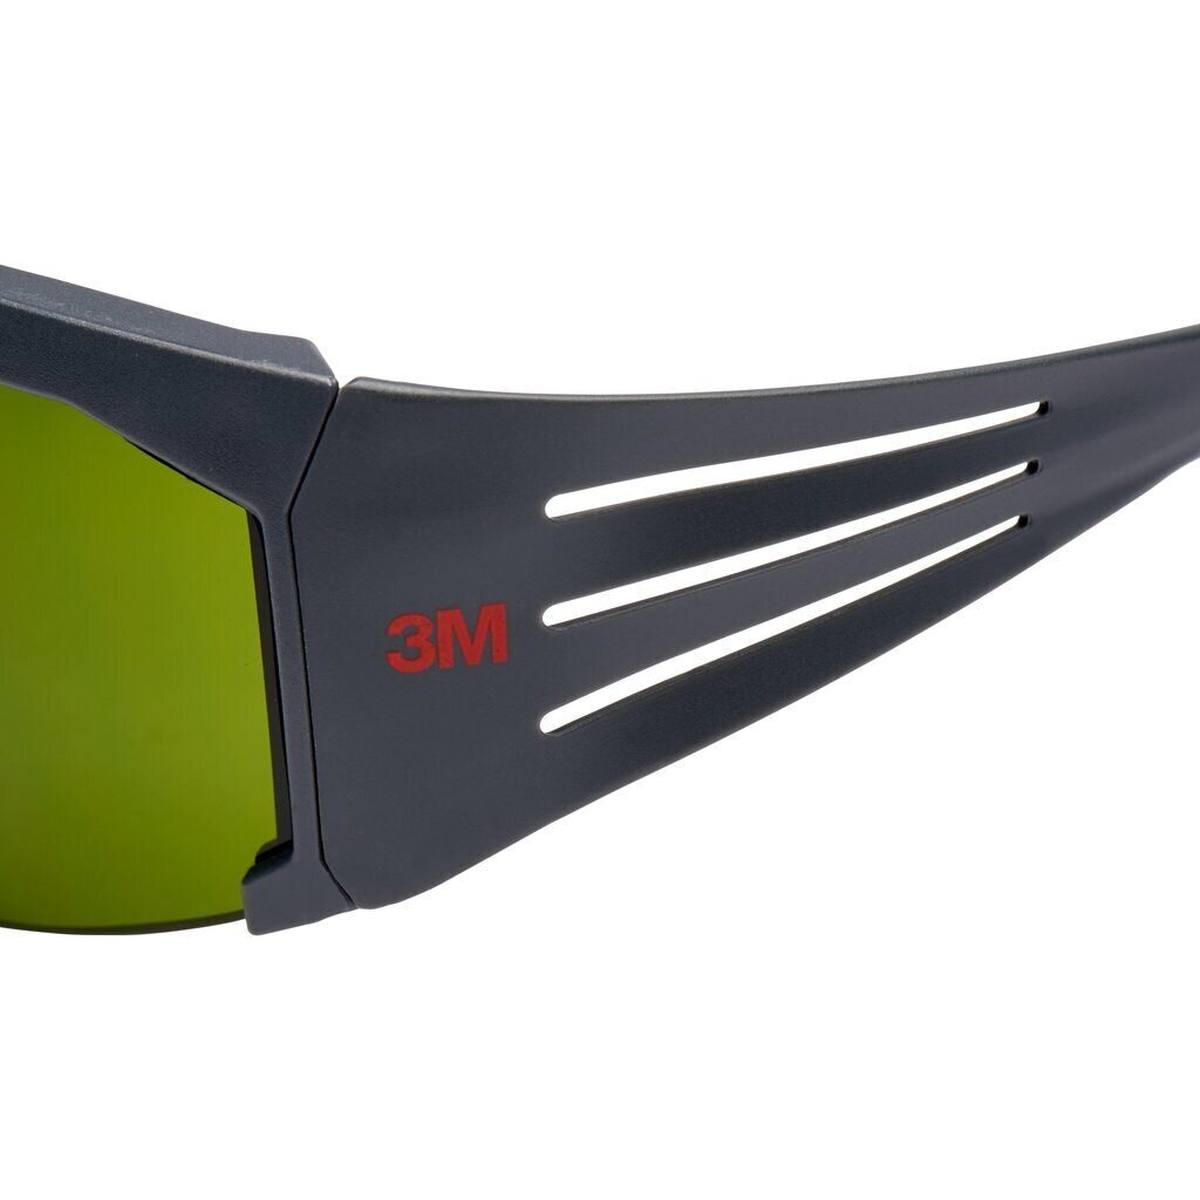 3M SecureFit 600 safety spectacles, grey temples, anti-scratch coating, welding lens protection level 3.0, SF630AS-EU